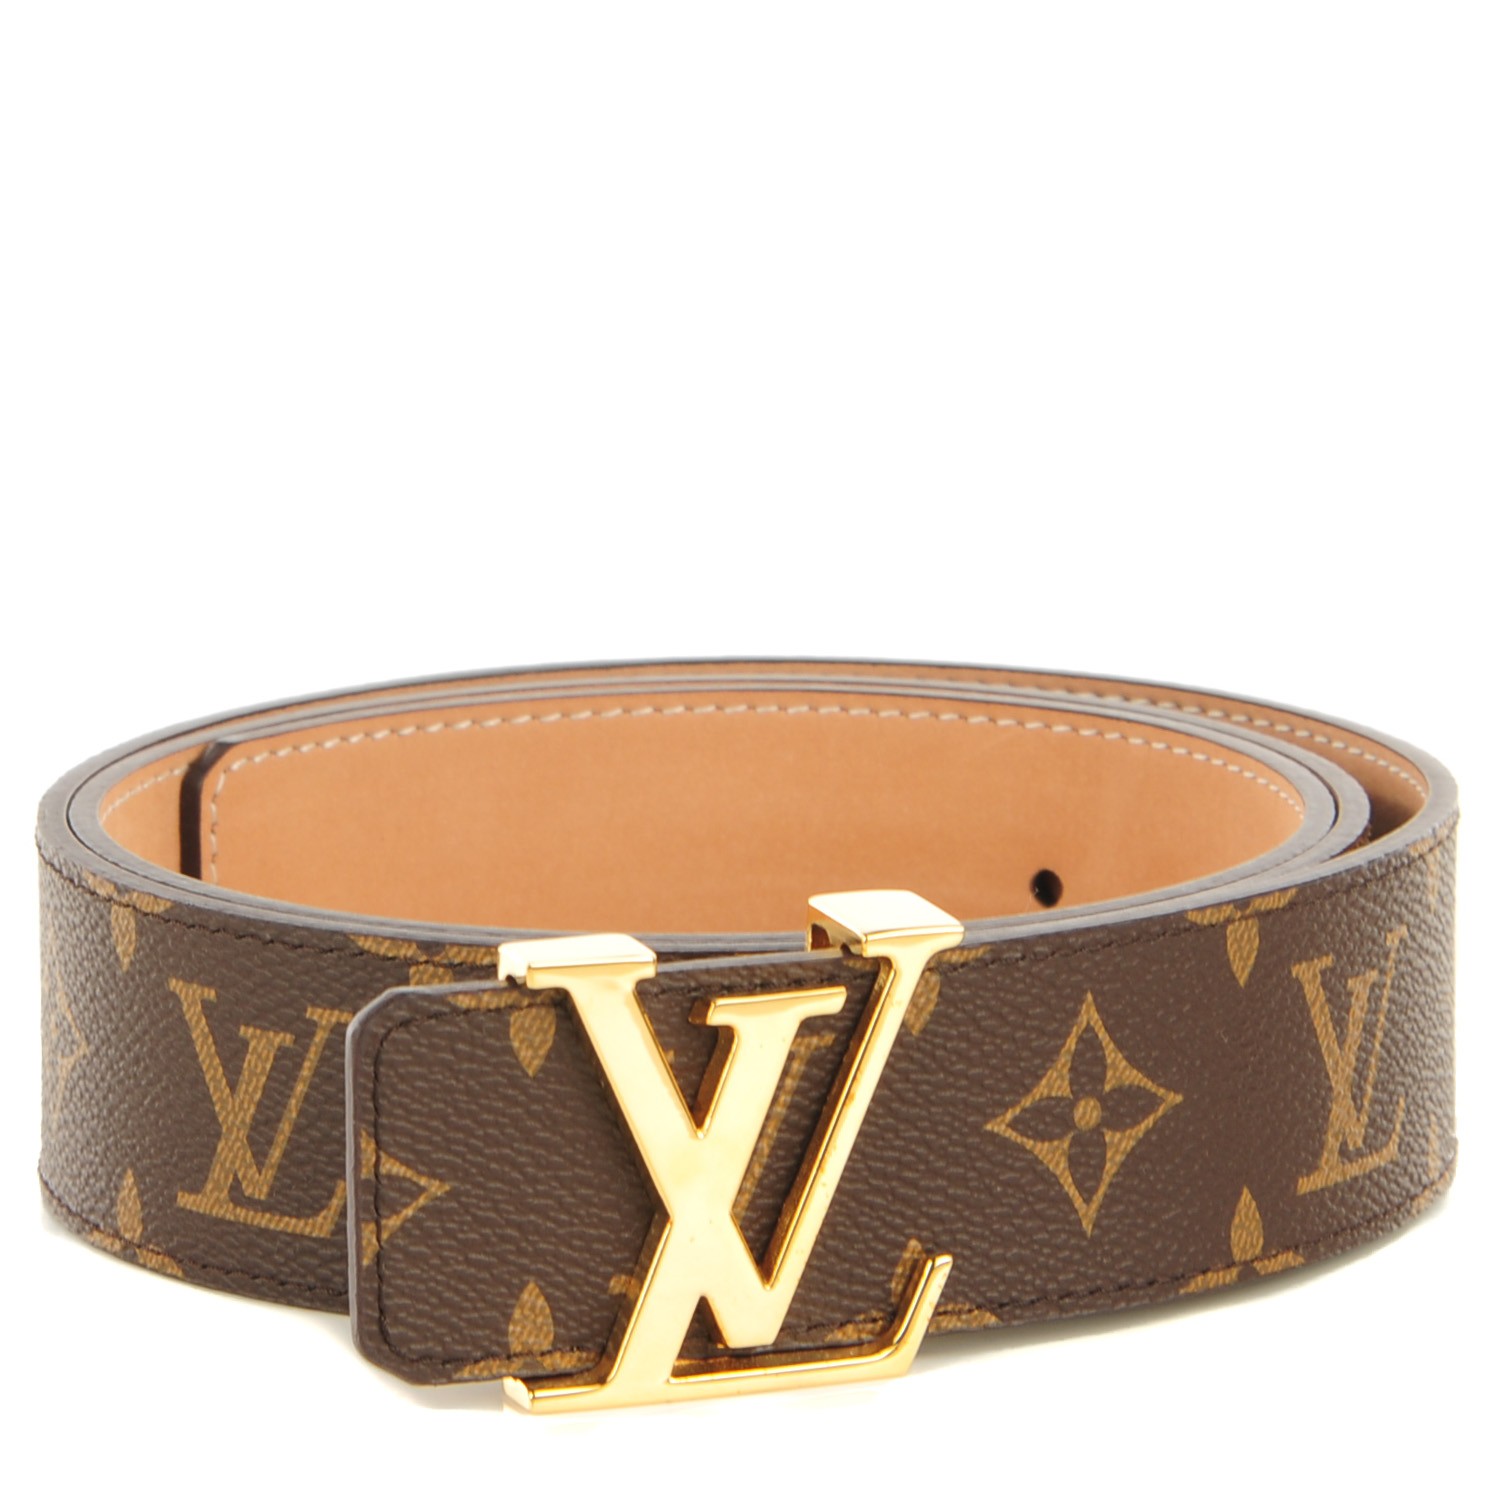 Louis Vuitton Belt Size 110 44 - 3 For Sale on 1stDibs  44/110 belt size  louis vuitton, louis vuitton belt 44/110